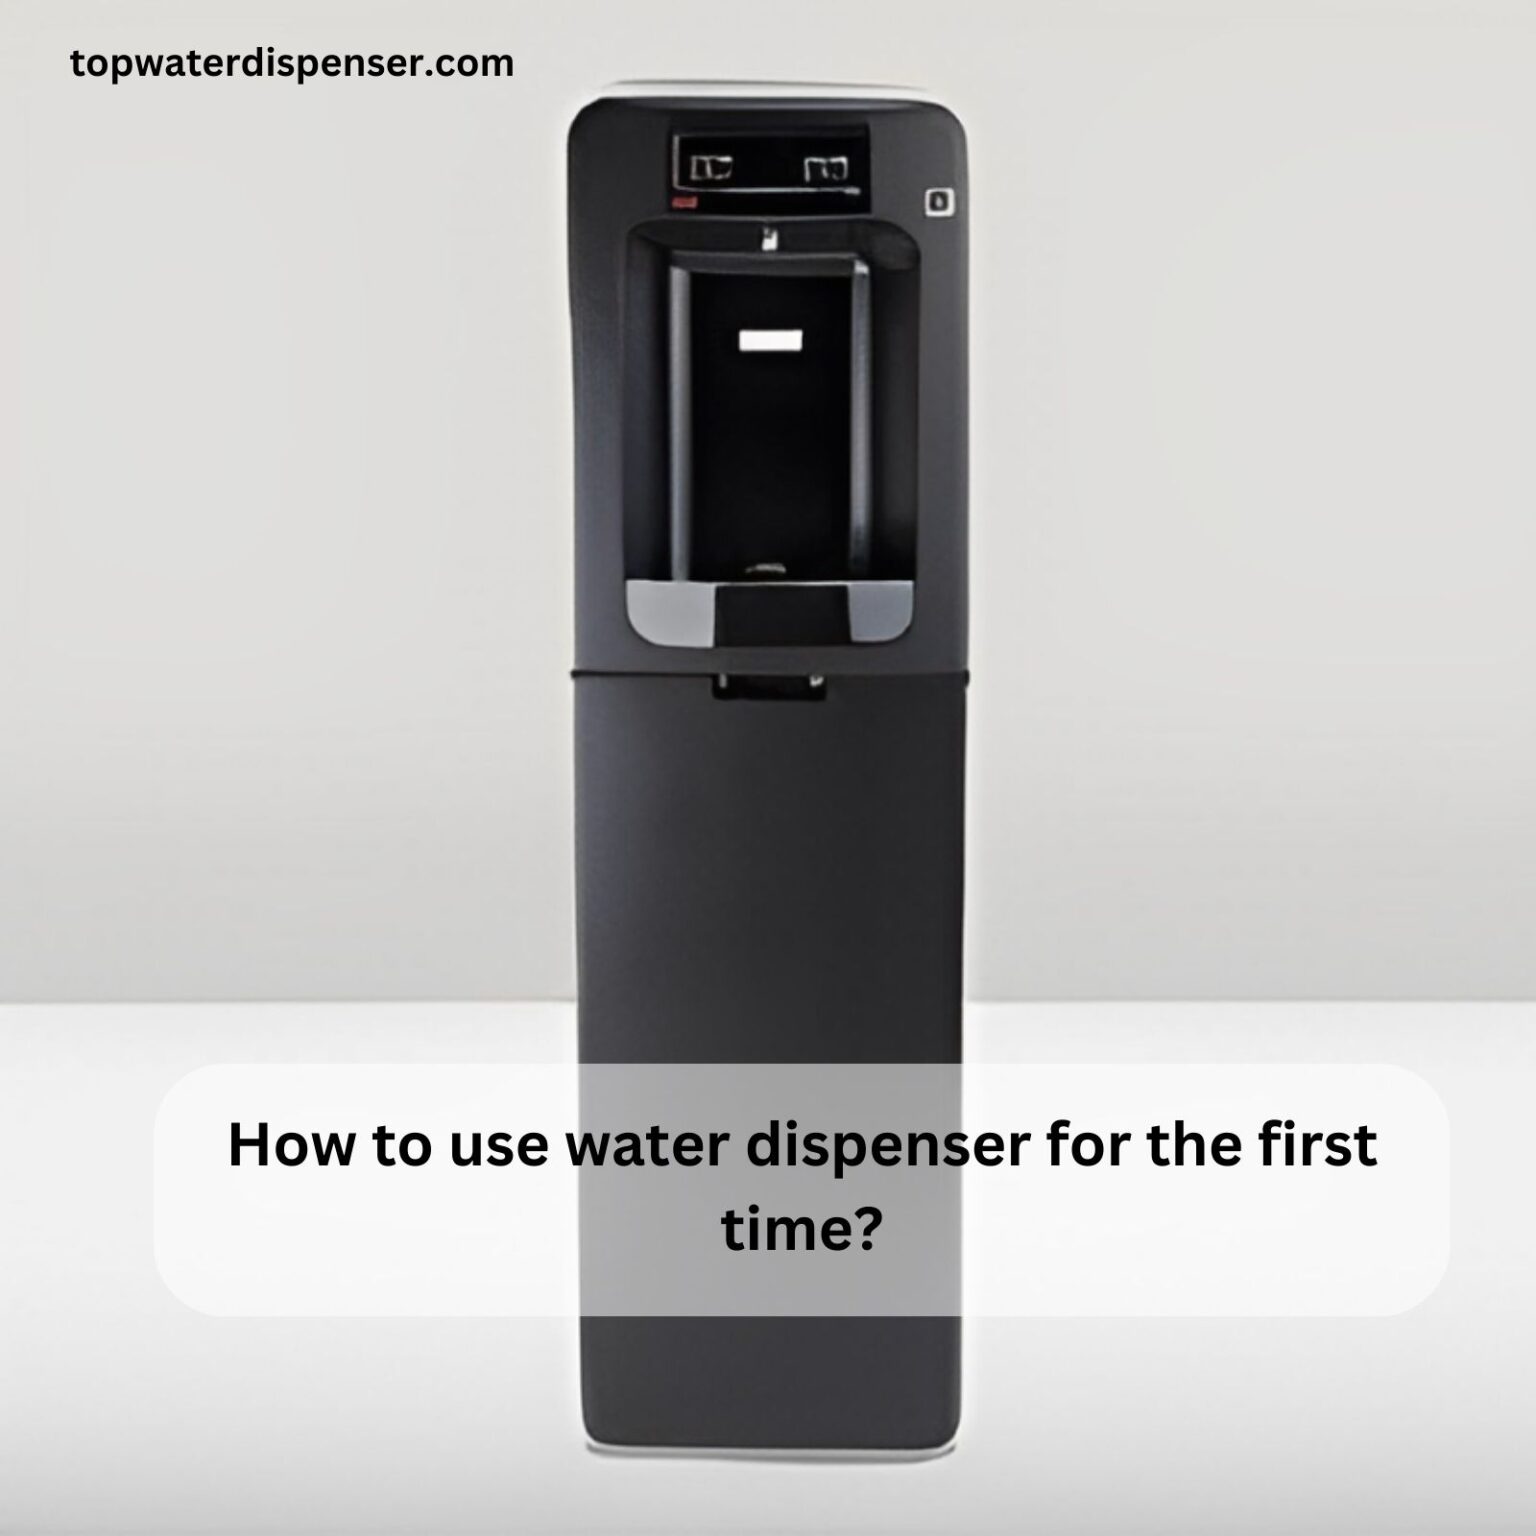 How to use water dispenser for the first time?